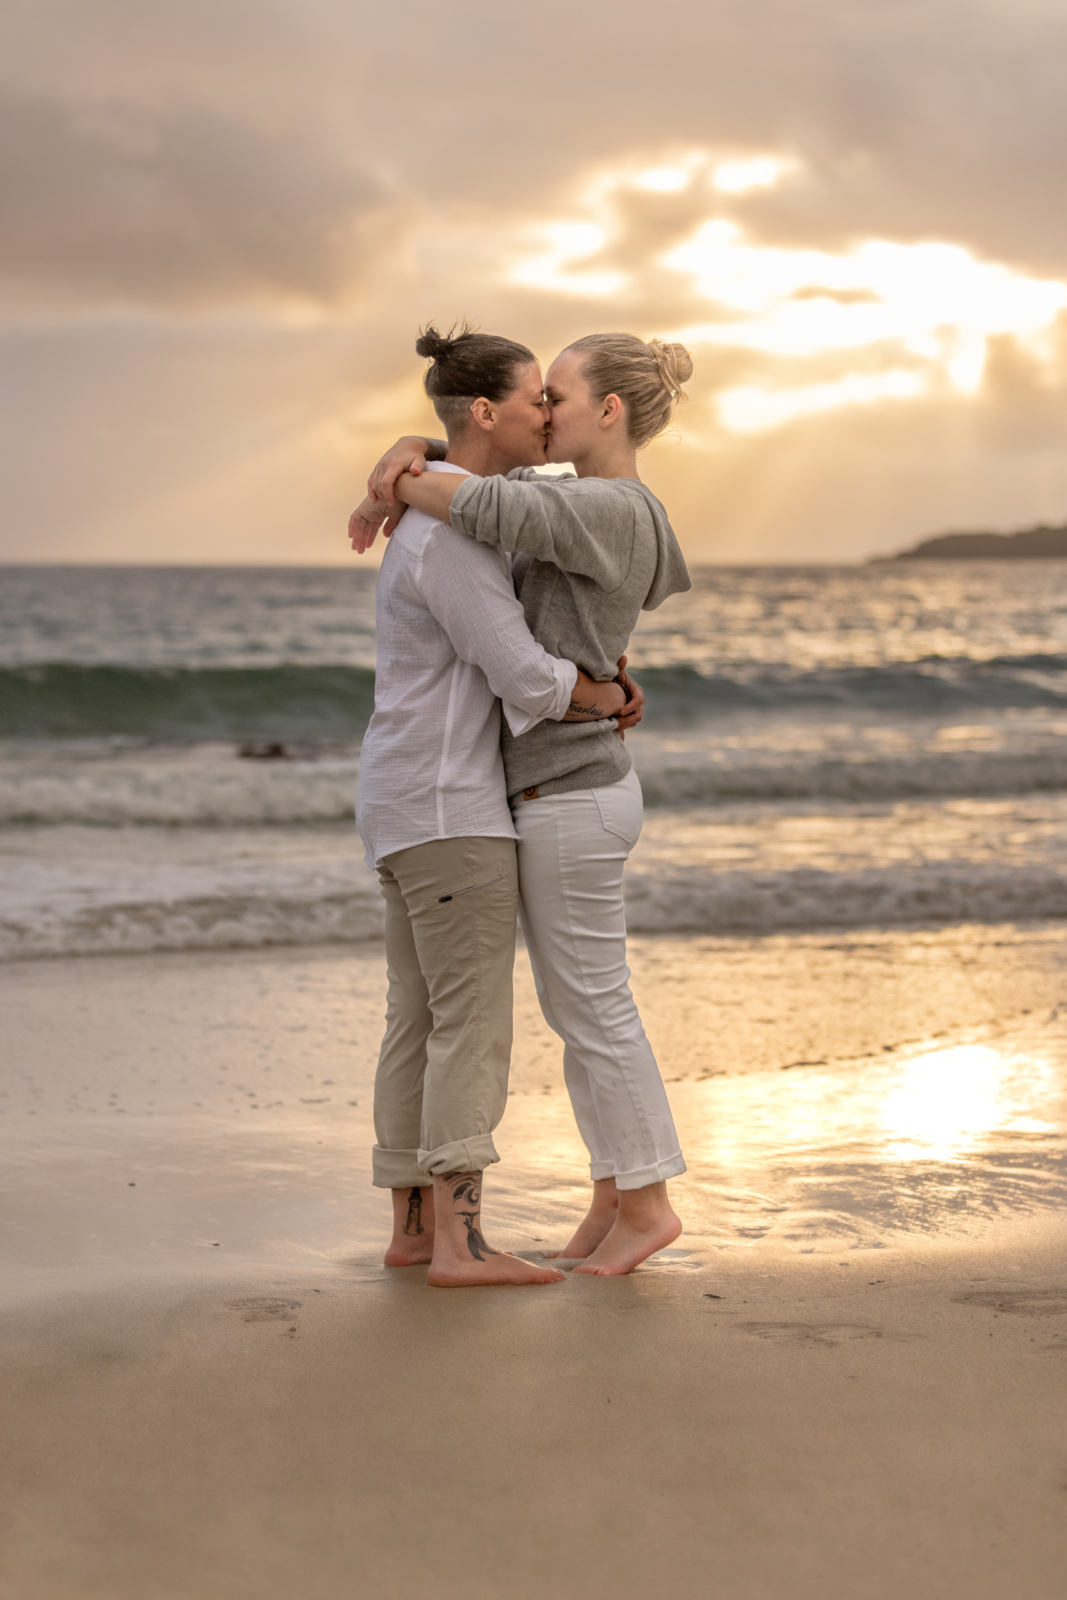 romantic engagement photos during sunset at the beach in Norway